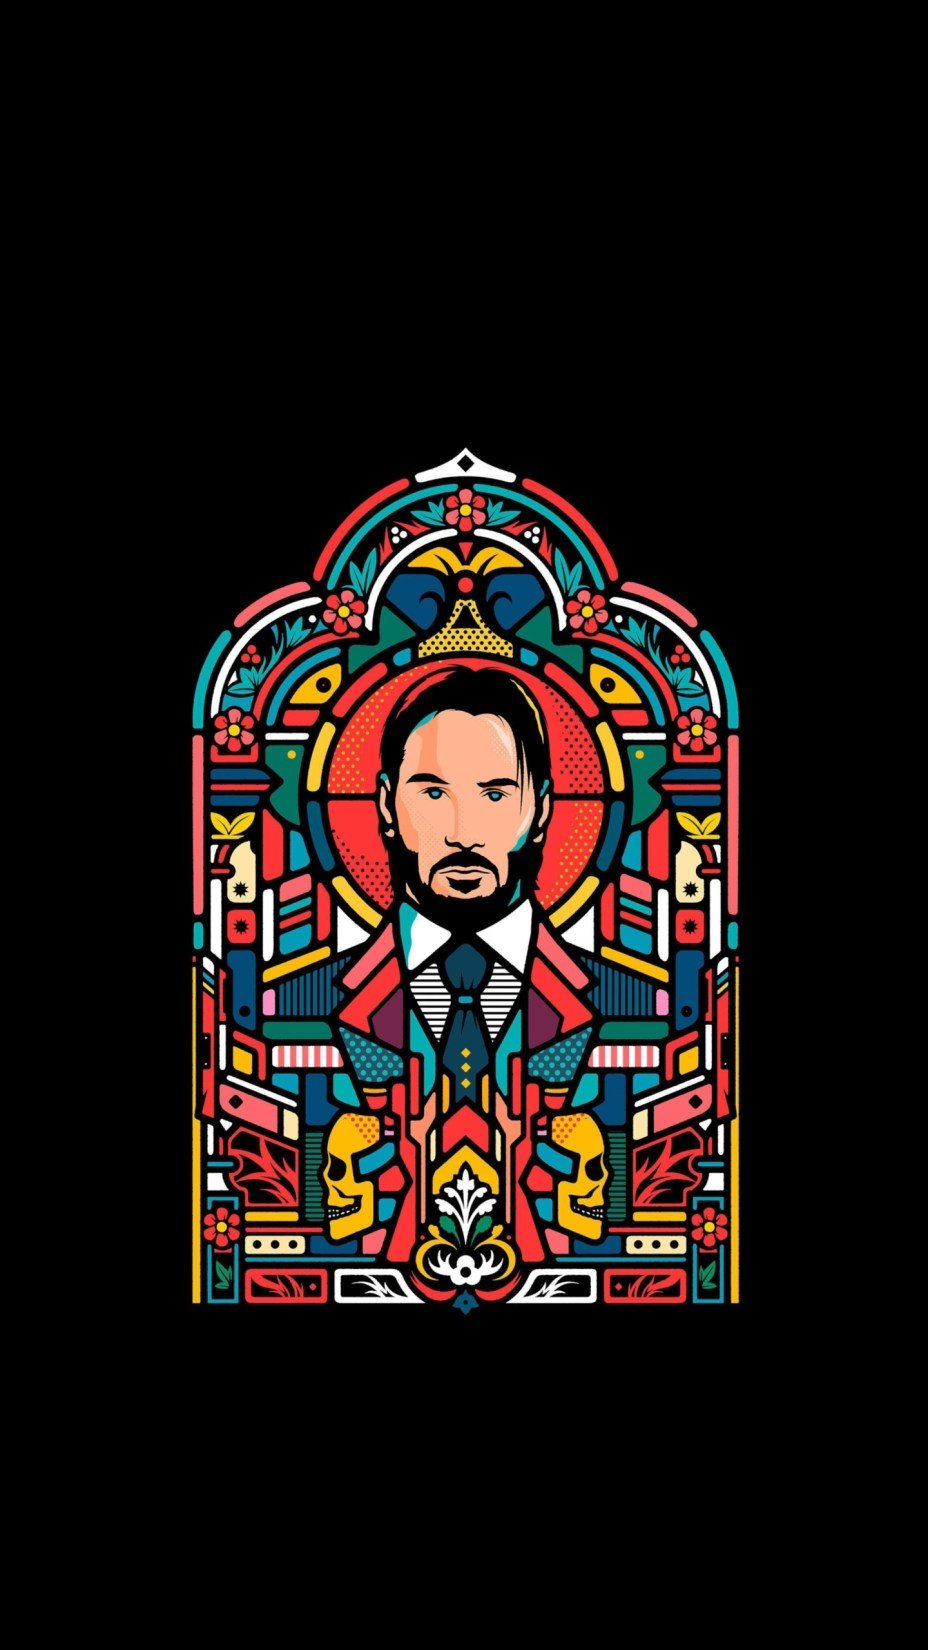 John Wick Thank you victor for coming all the way